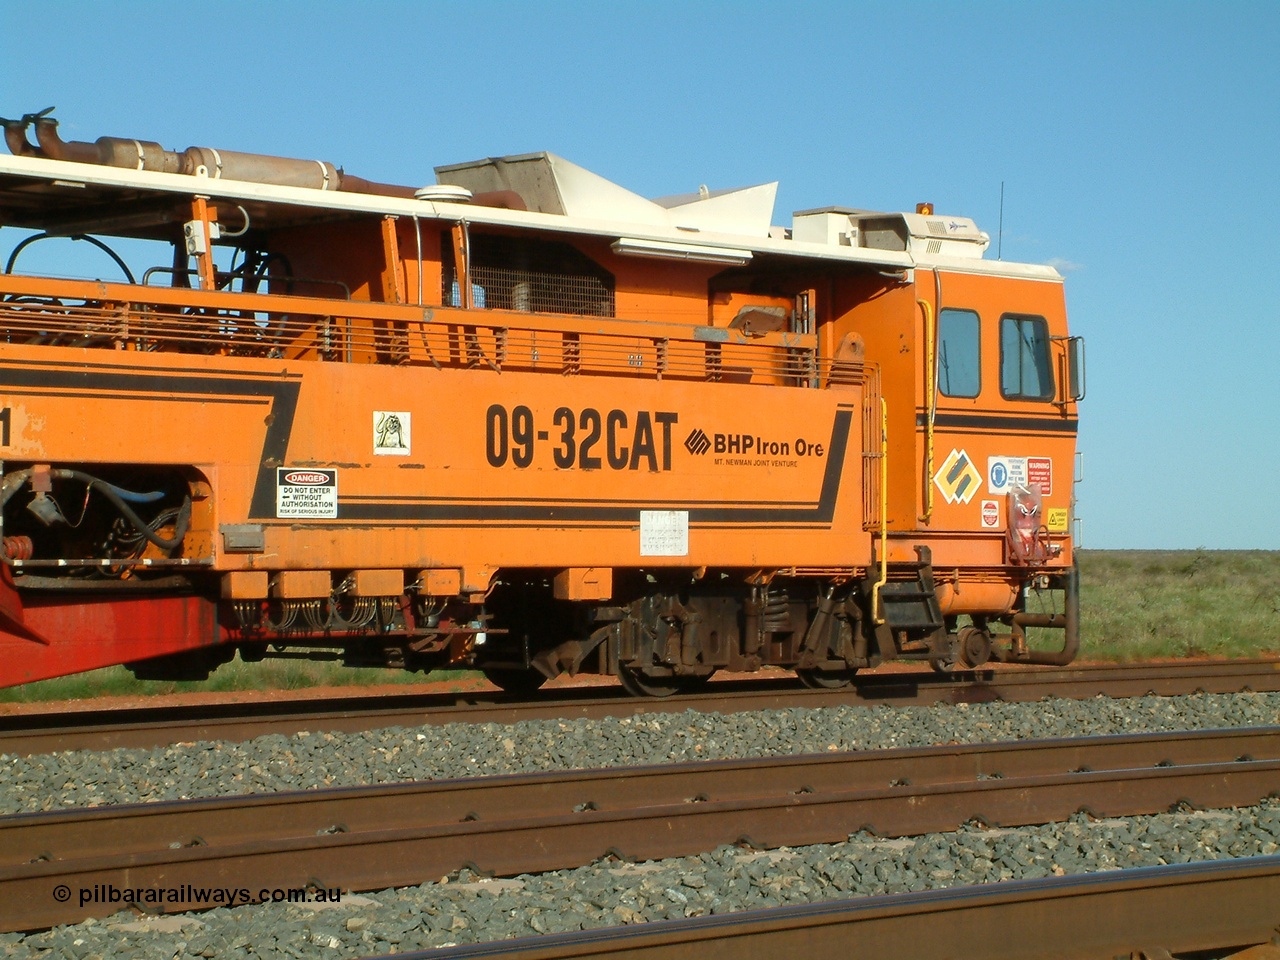 040408 162730
Mooka Siding north backtrack, view of the driving cab end of BHP's mainline Tamper 1, Plasser Australia 09-32 CAT model with serial 306. 8th April 2004.
Keywords: Tamper1;Plasser-Australia;09-32-CAT;306;track-machine;